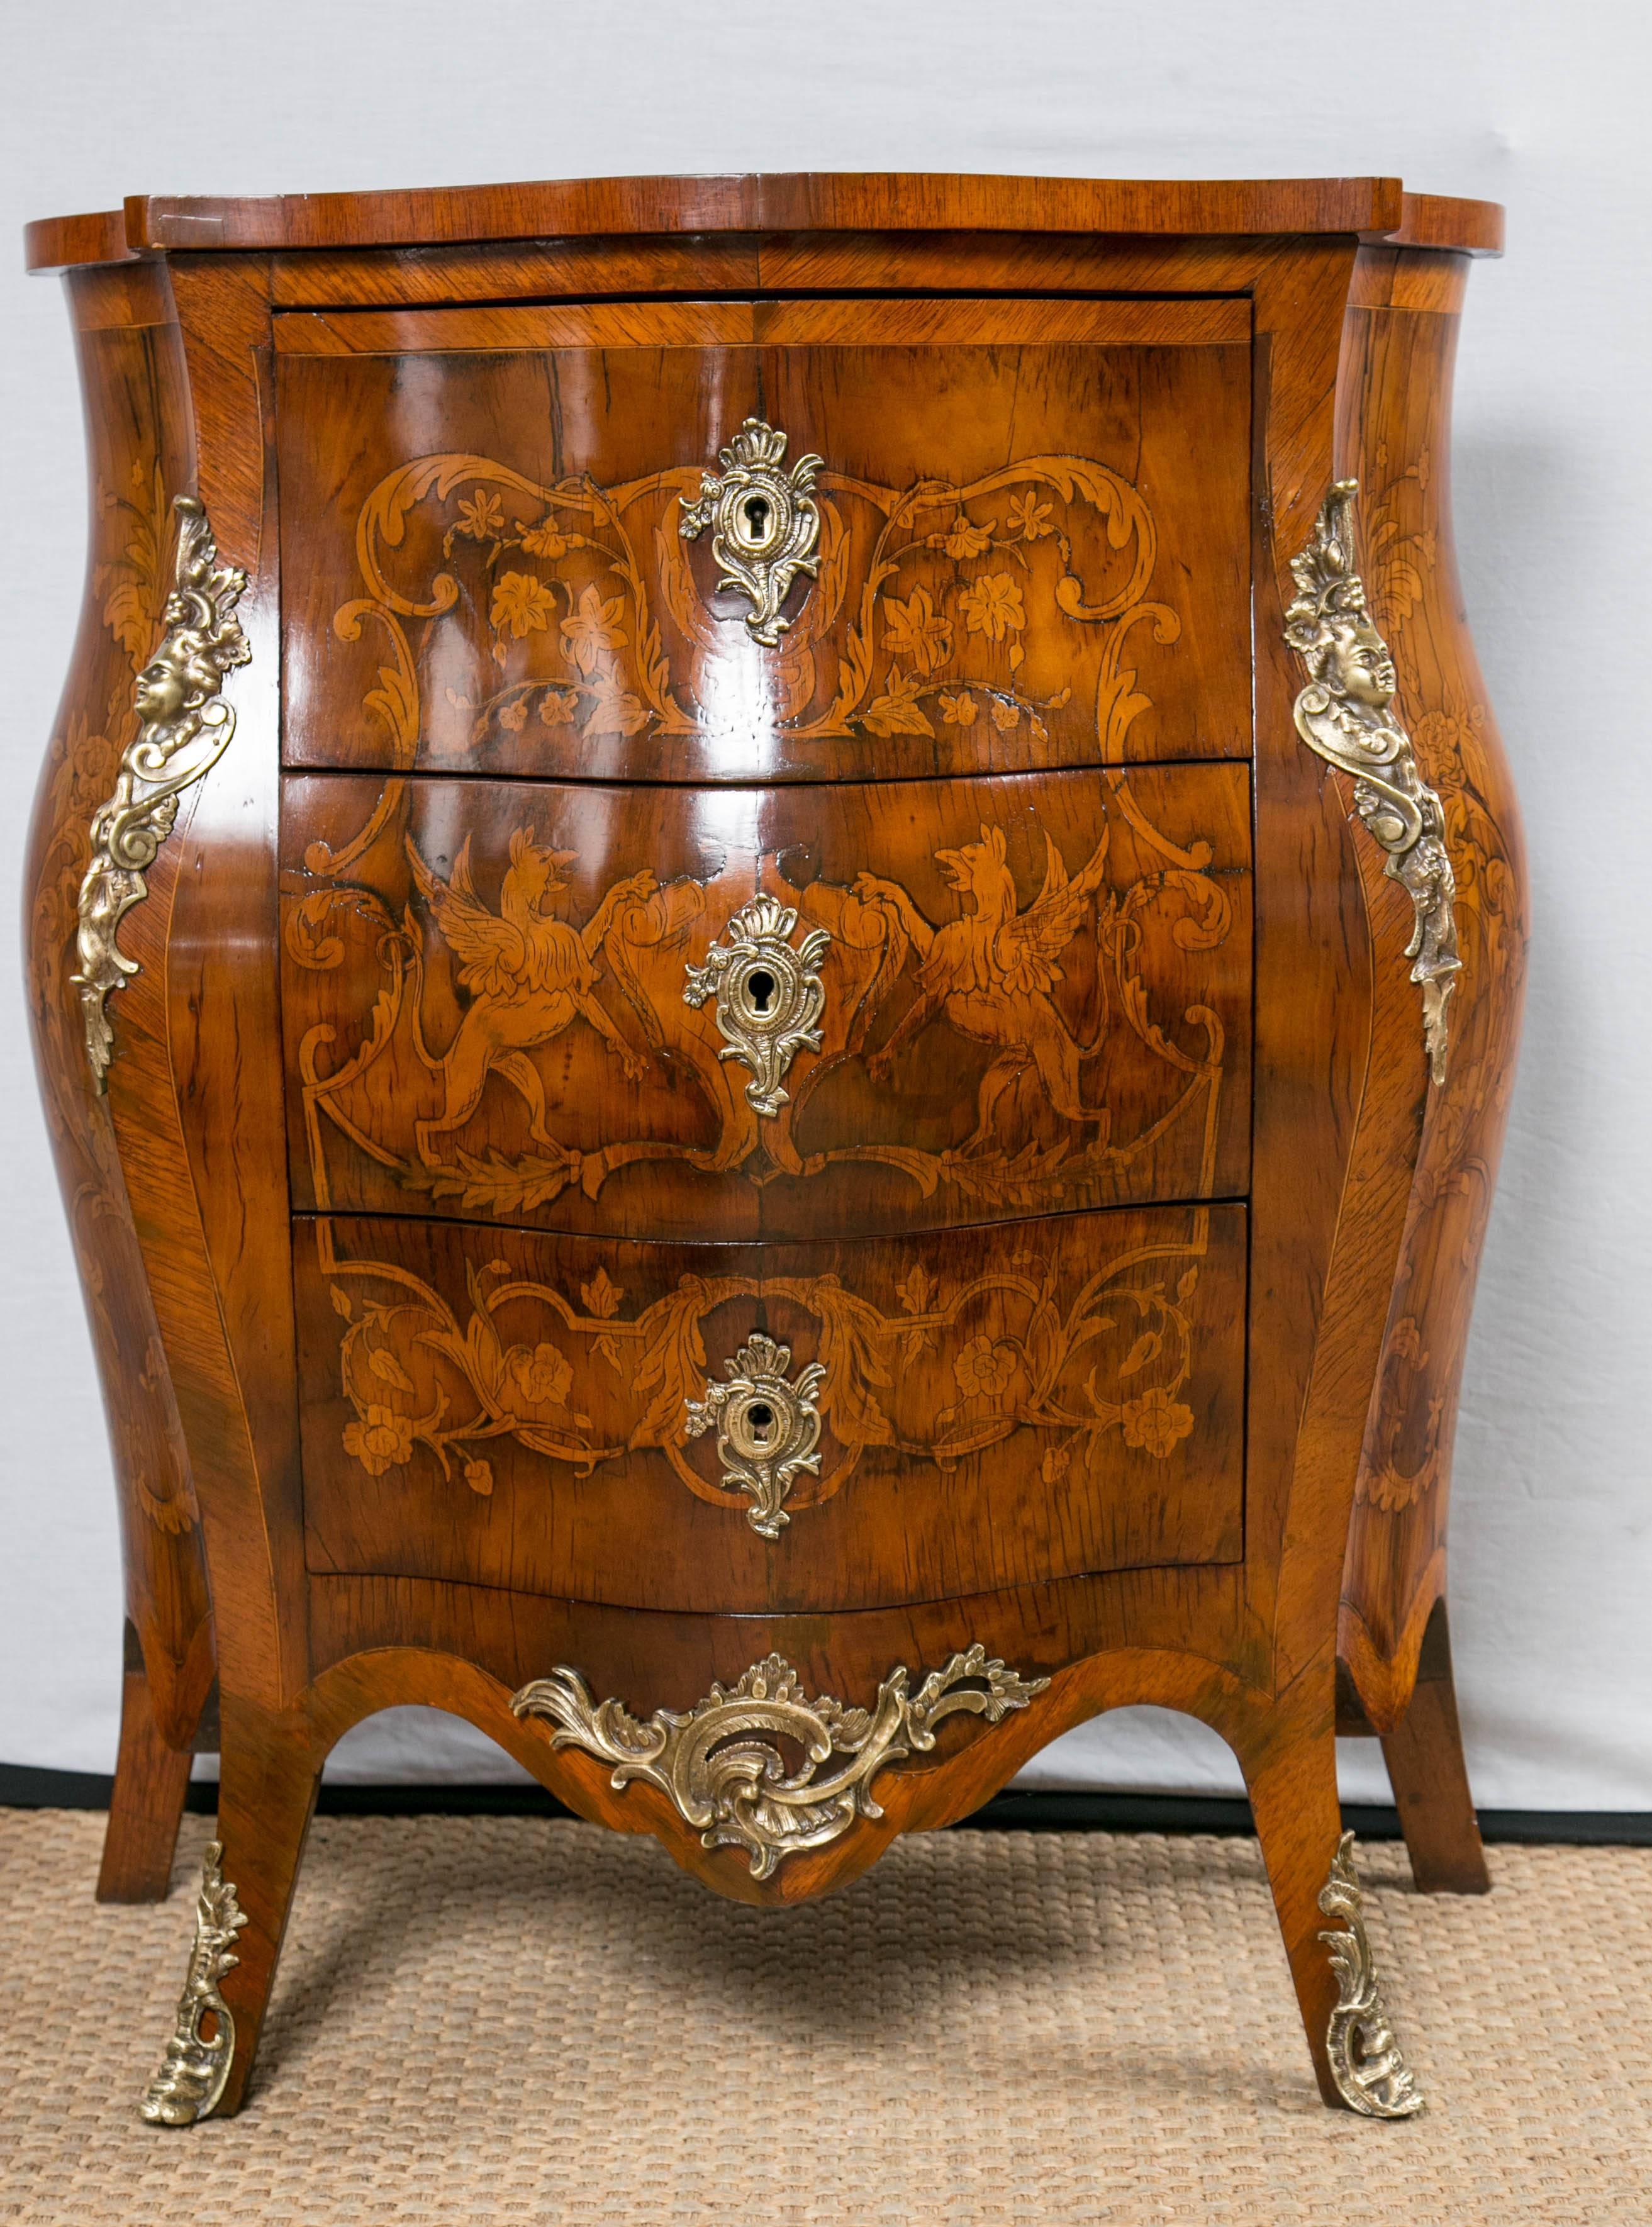 Dating from the late 19th century, this bombe style commode has gilt bronze mounts and marquetry inlays on both the front, sides and top. It has a deep shaped top and deep apron.
 